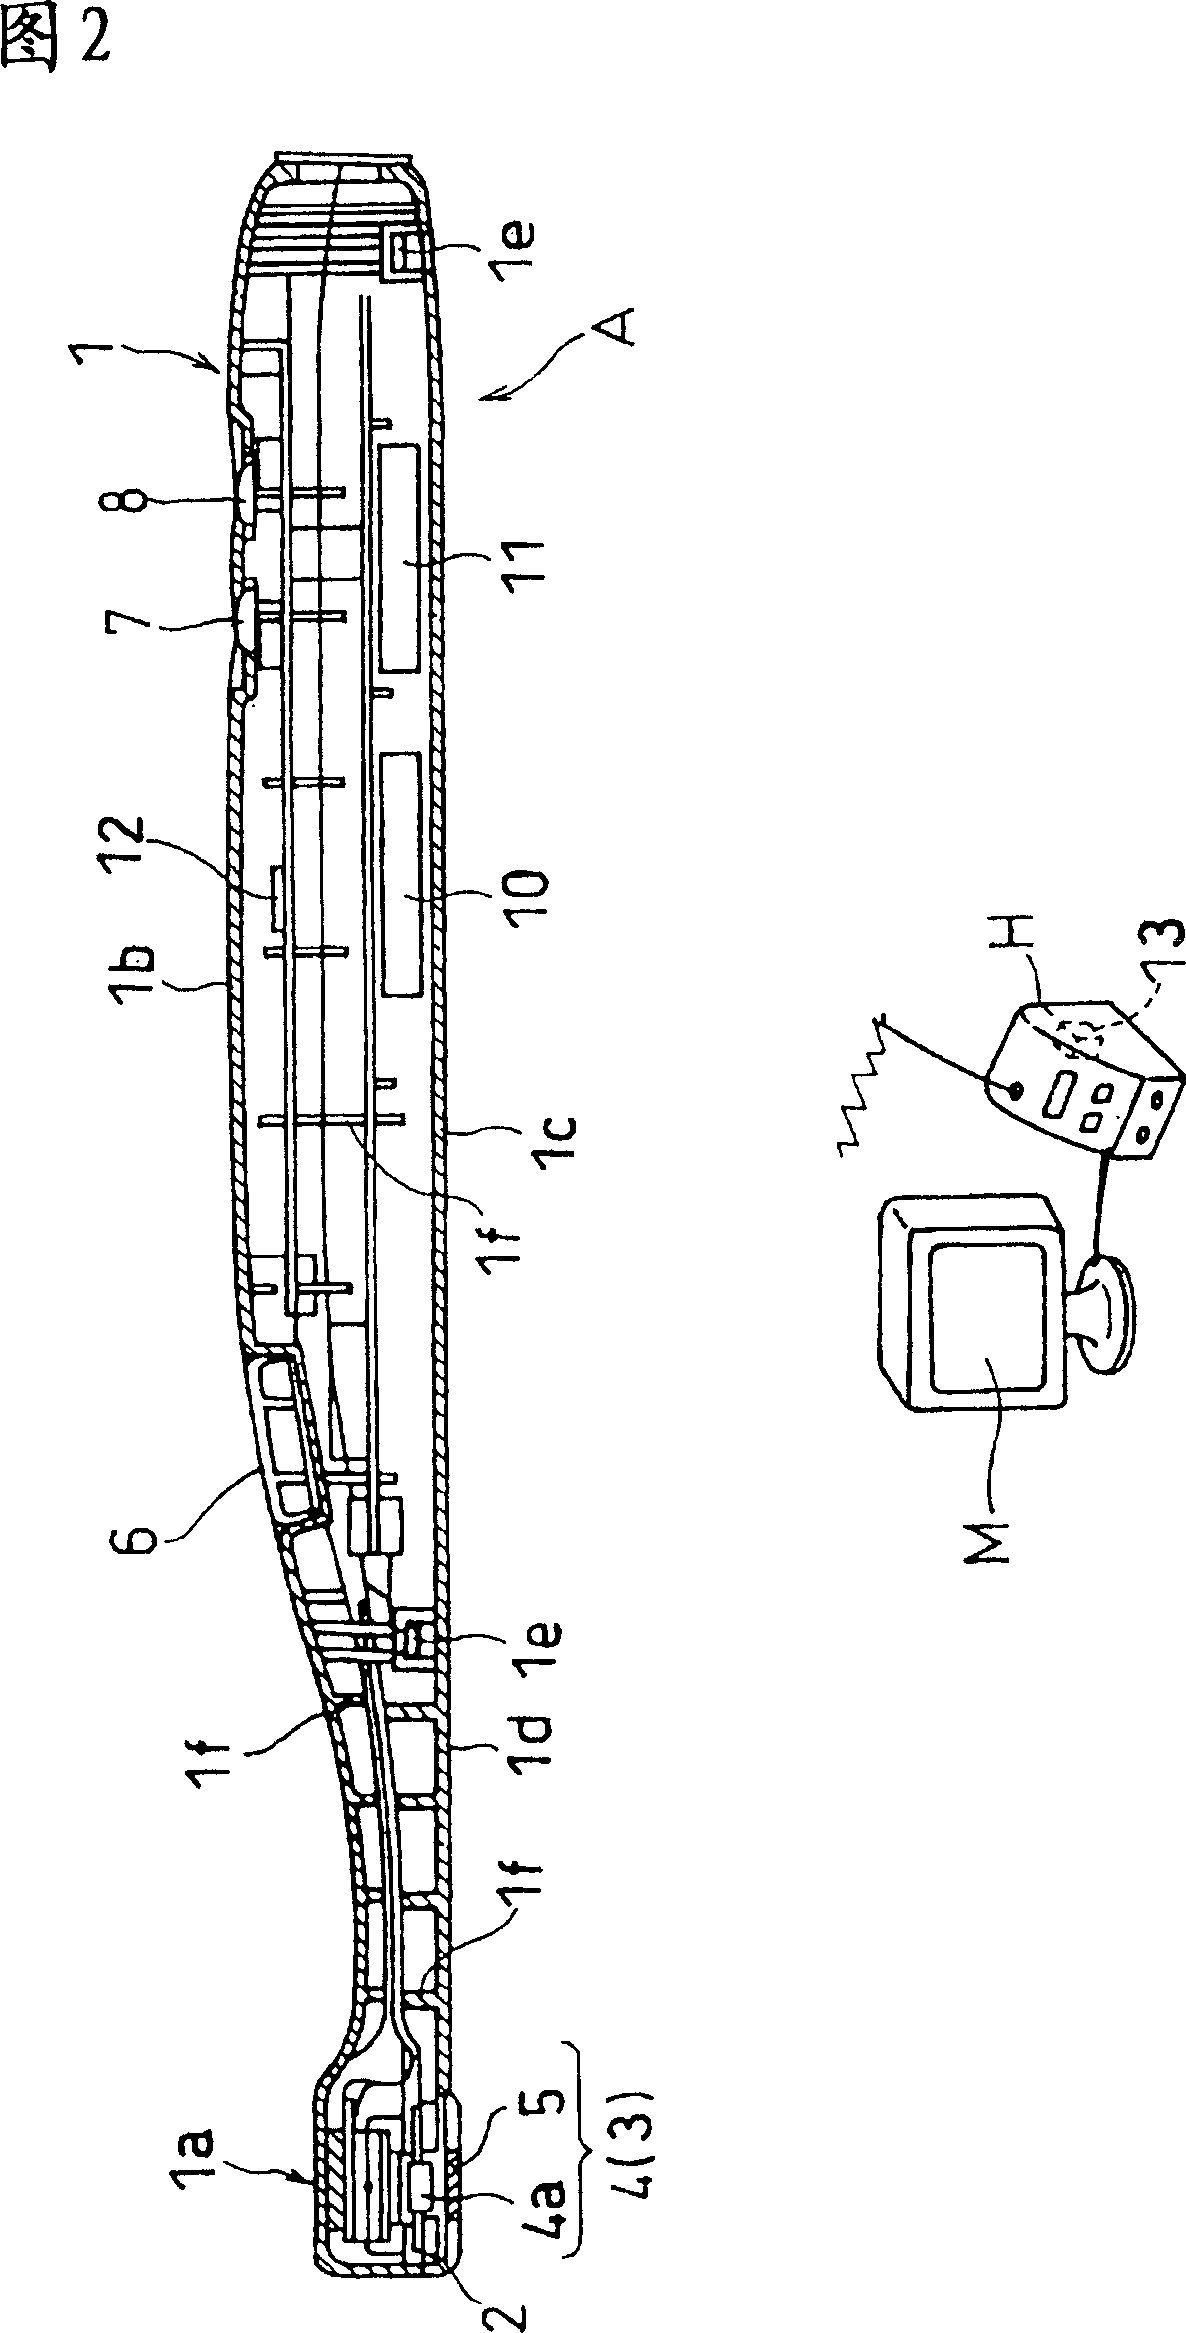 Living body observing apparatus, intraoral imaging system, and medical treatment appliance